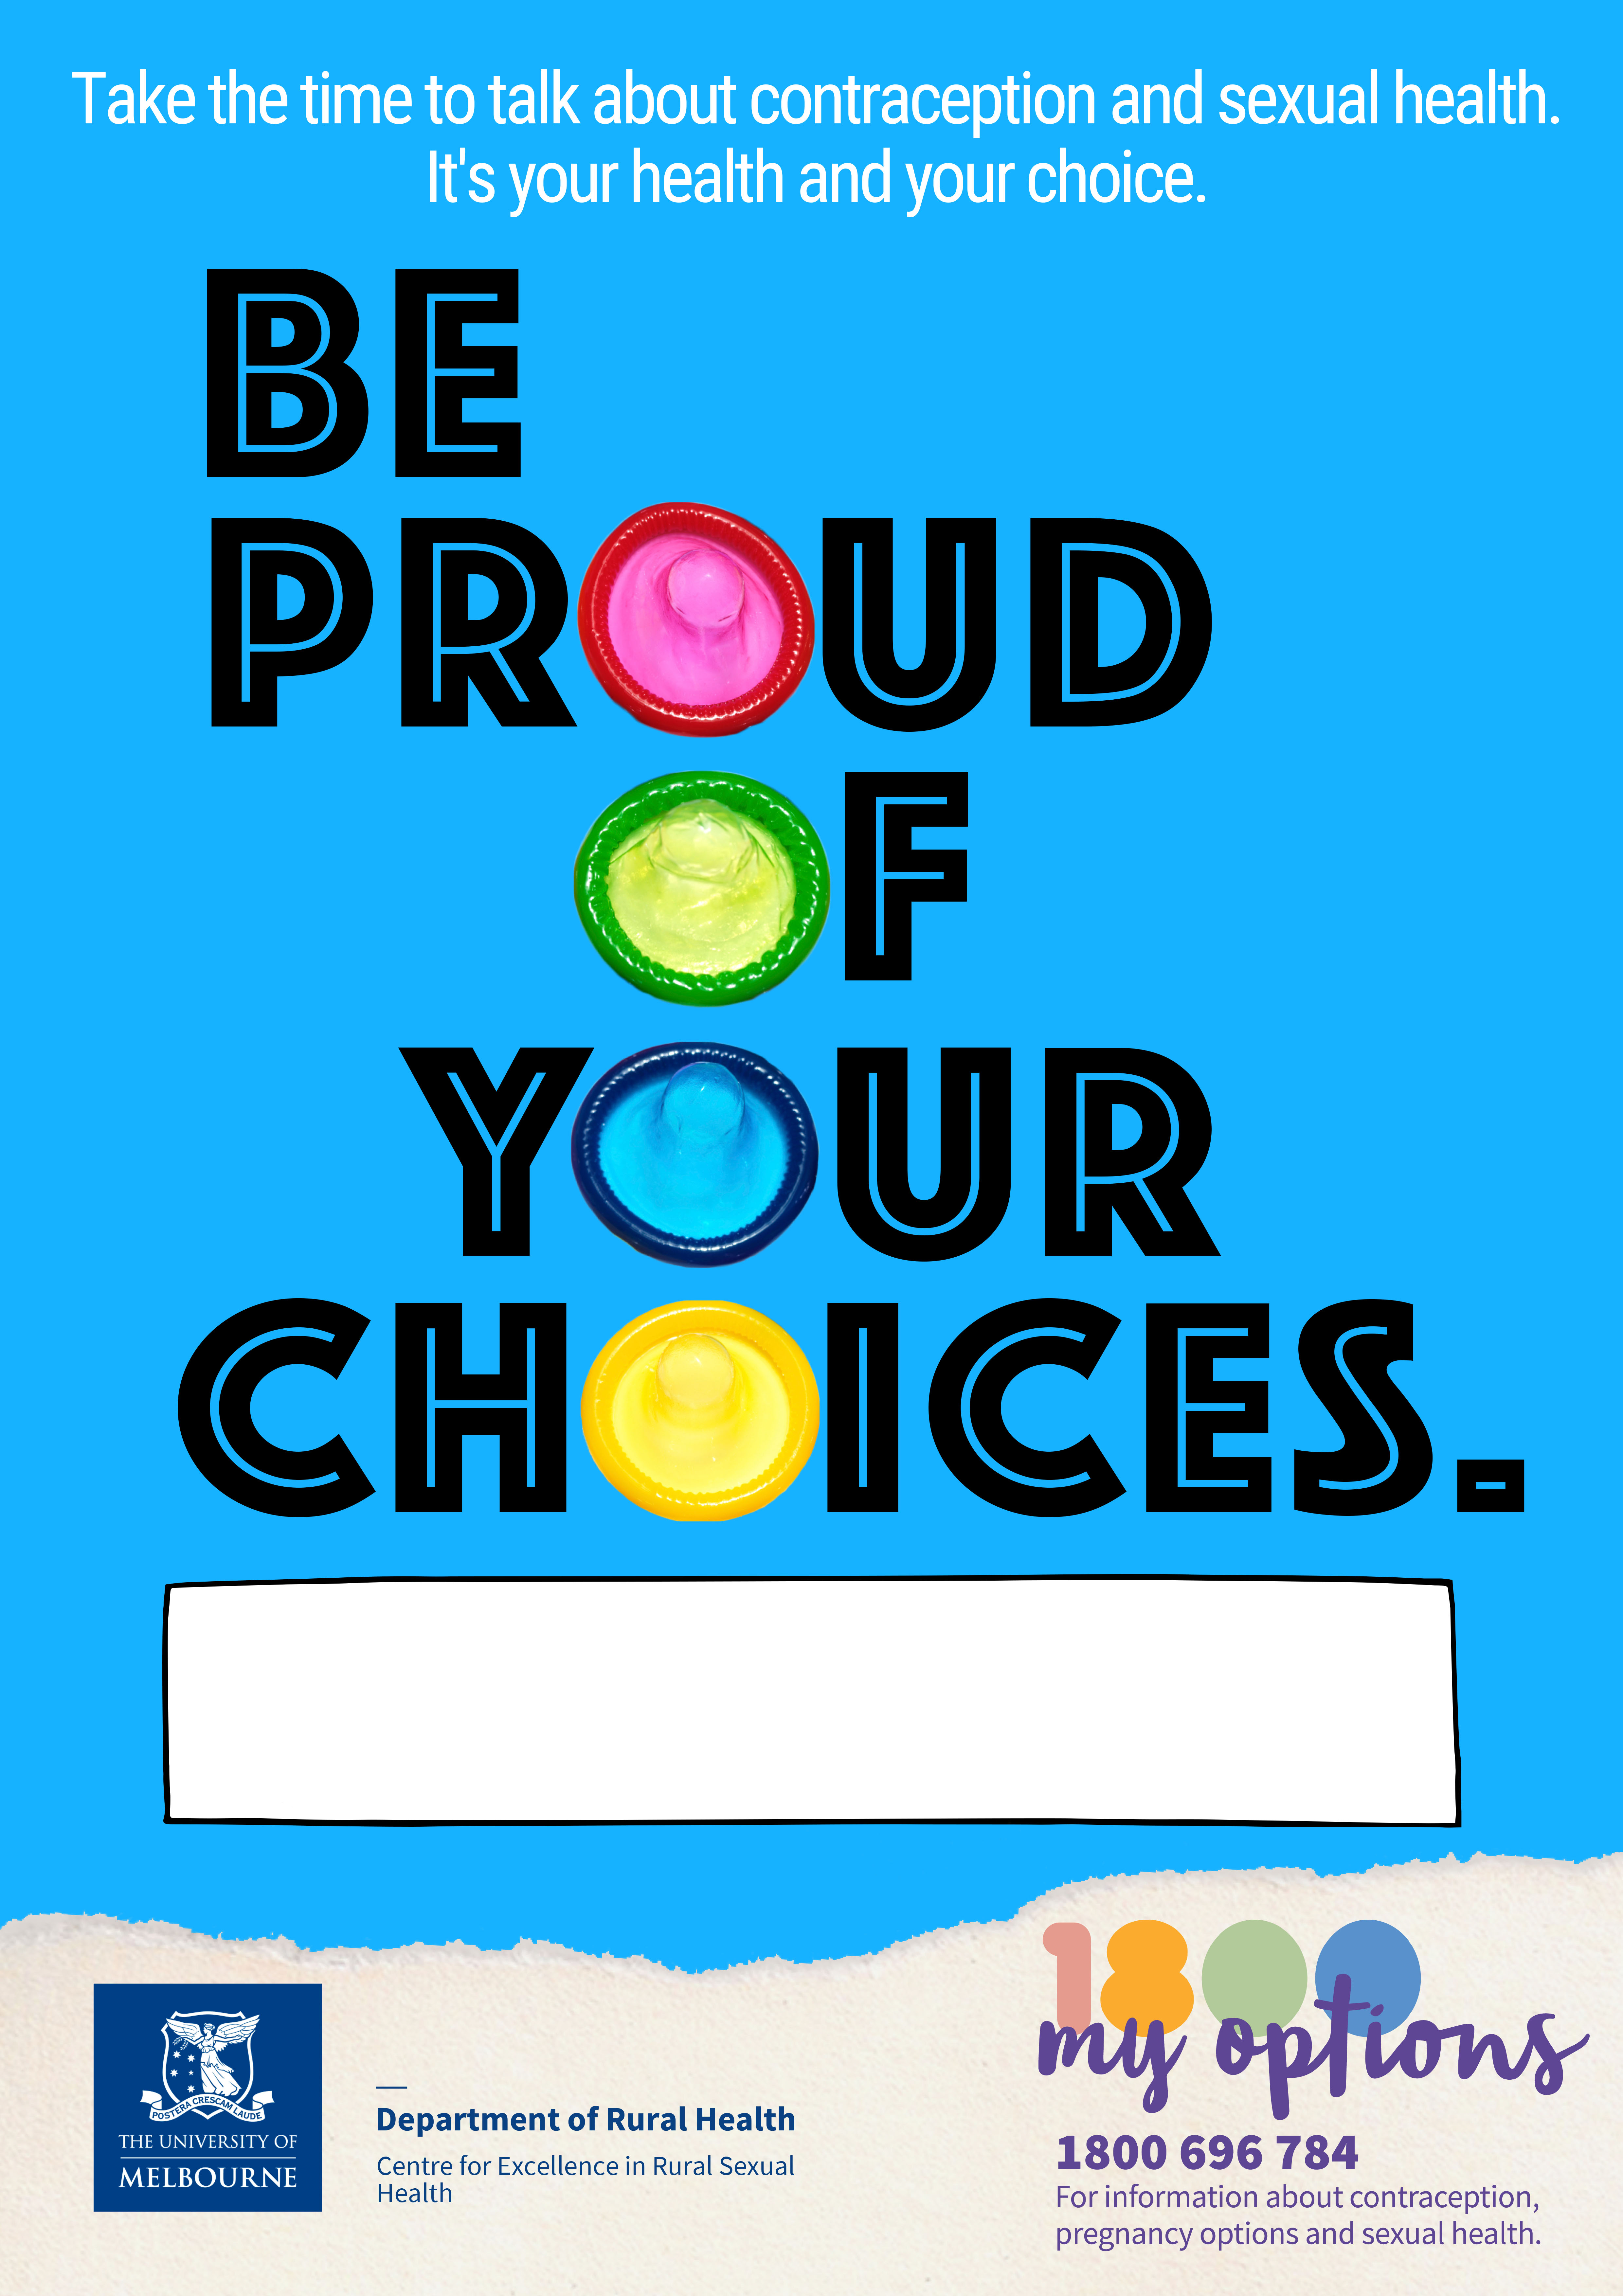 Poster stating "Be Proud of your choices"